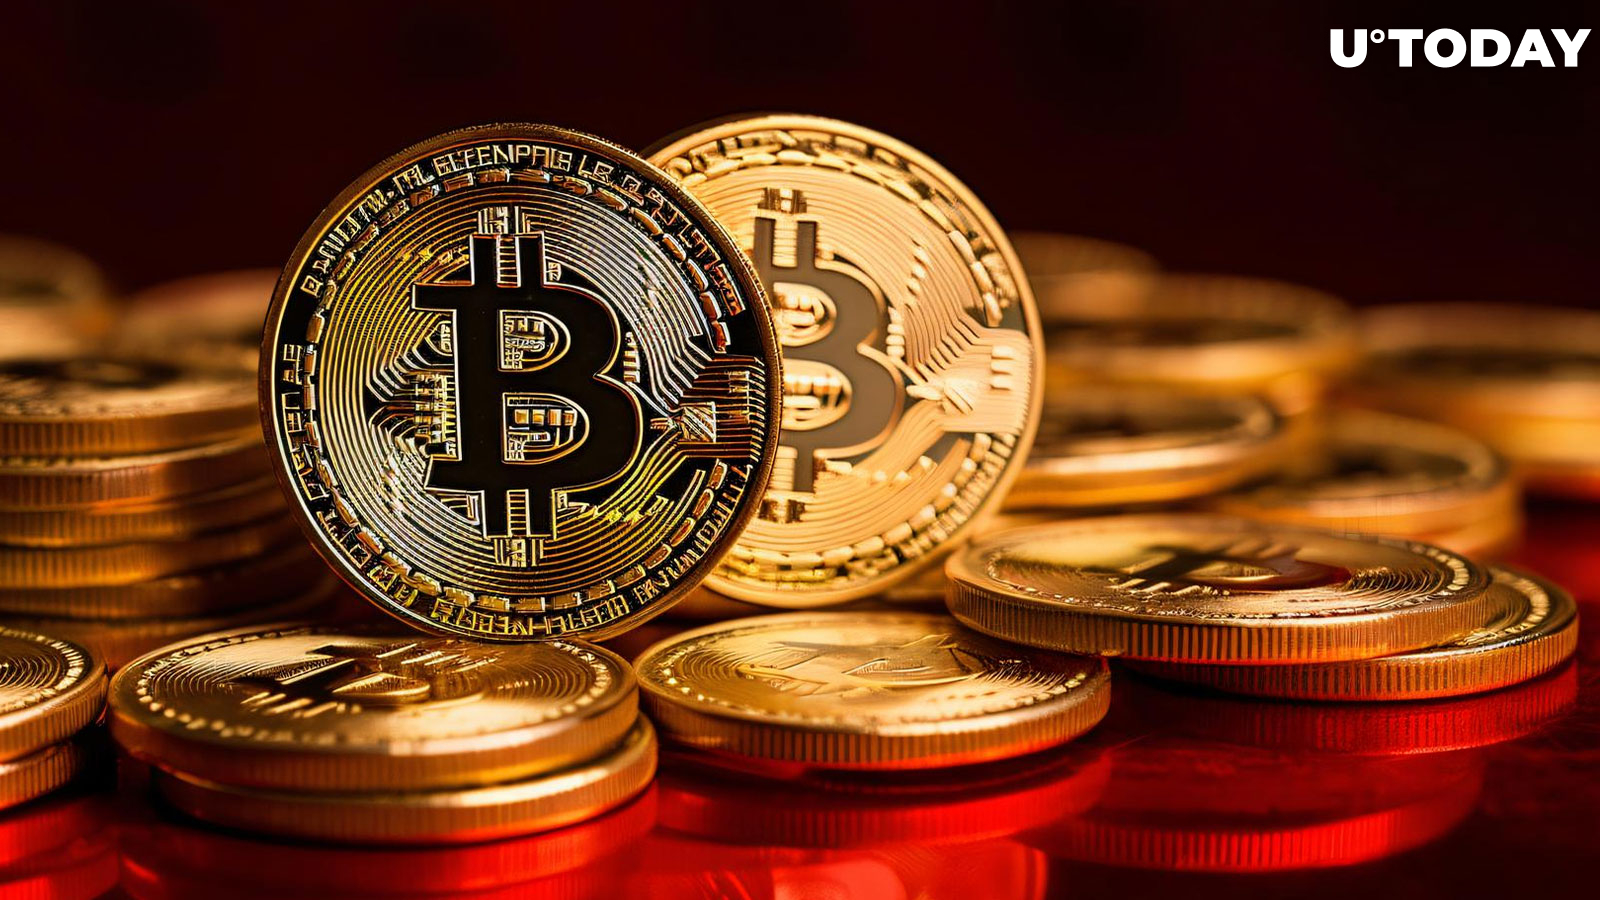 Bitcoin: Here's Crucial Factor to Determine if BTC Hits $30,000 or Falls to $23,000